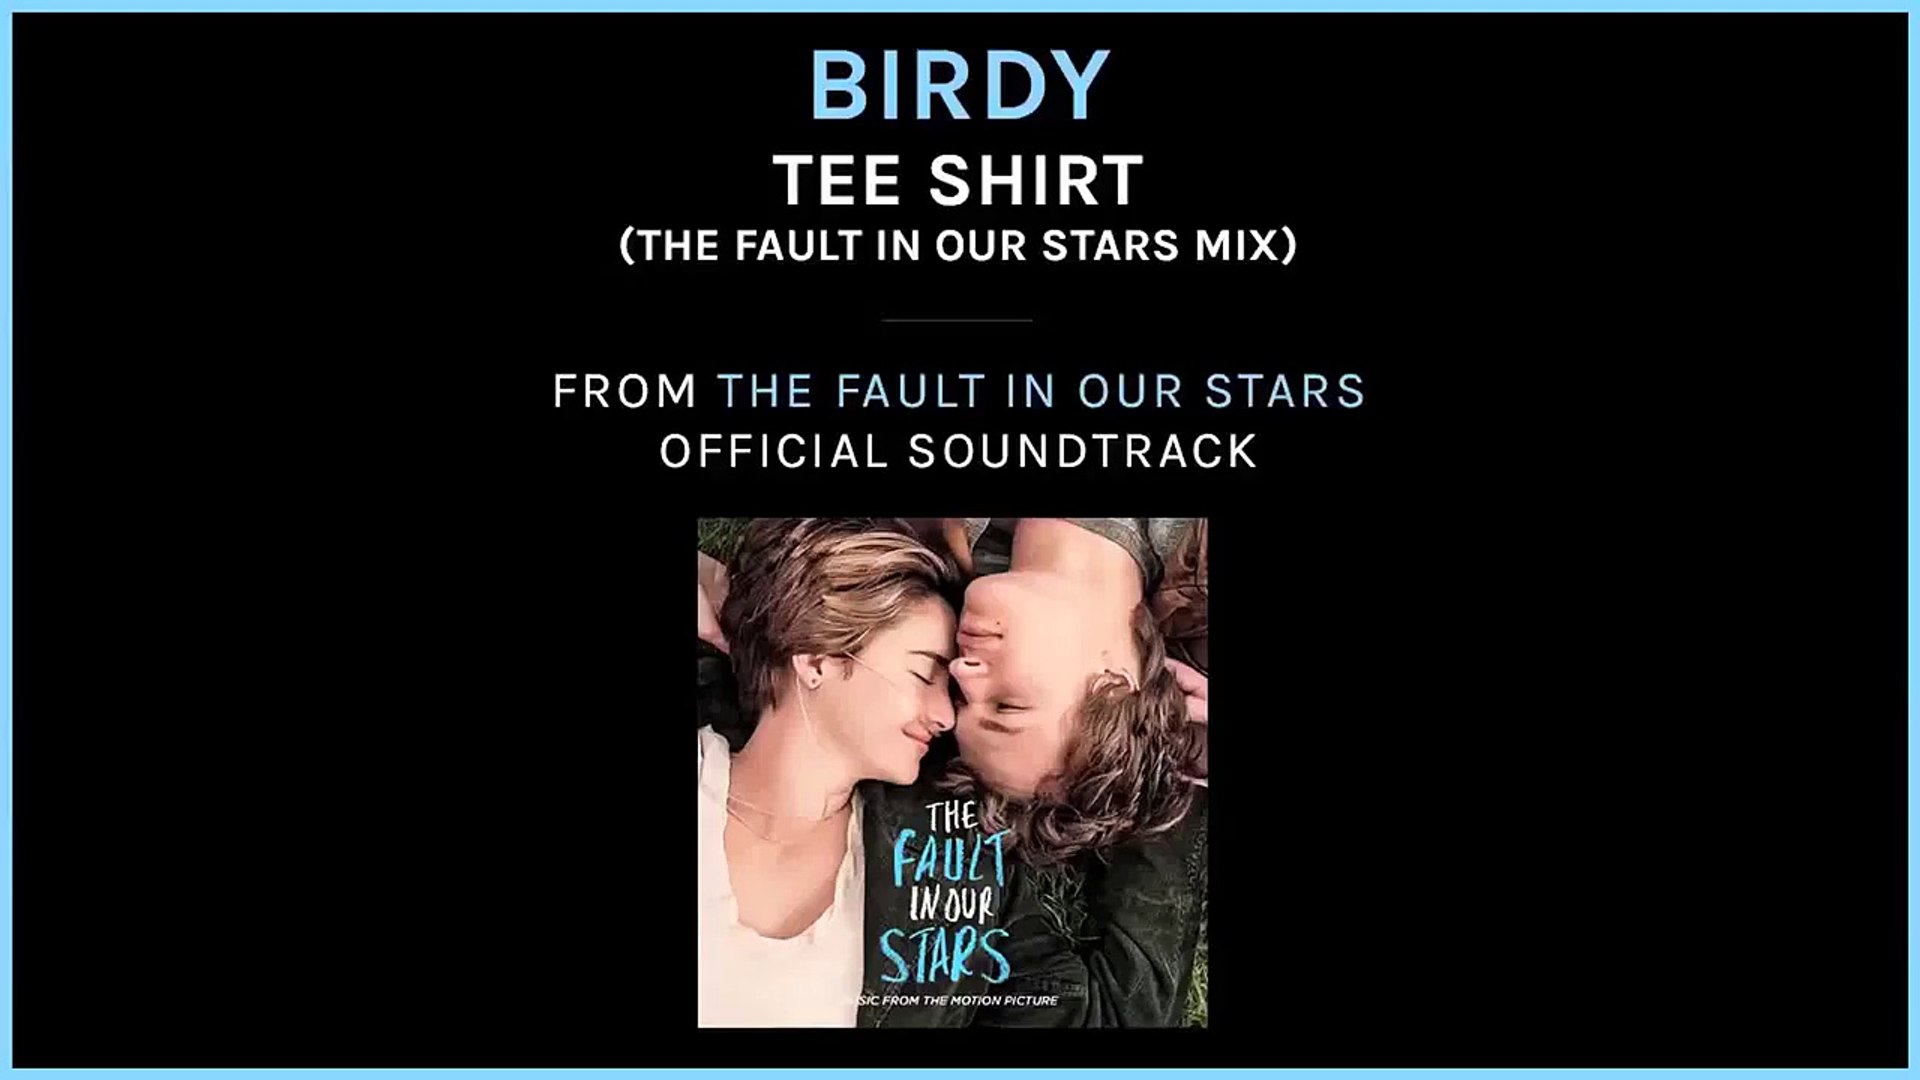 The Fault In Our Stars | Birdy "Tee Shirt" [TFIOS Mix] | 20th Century FOX -  video Dailymotion